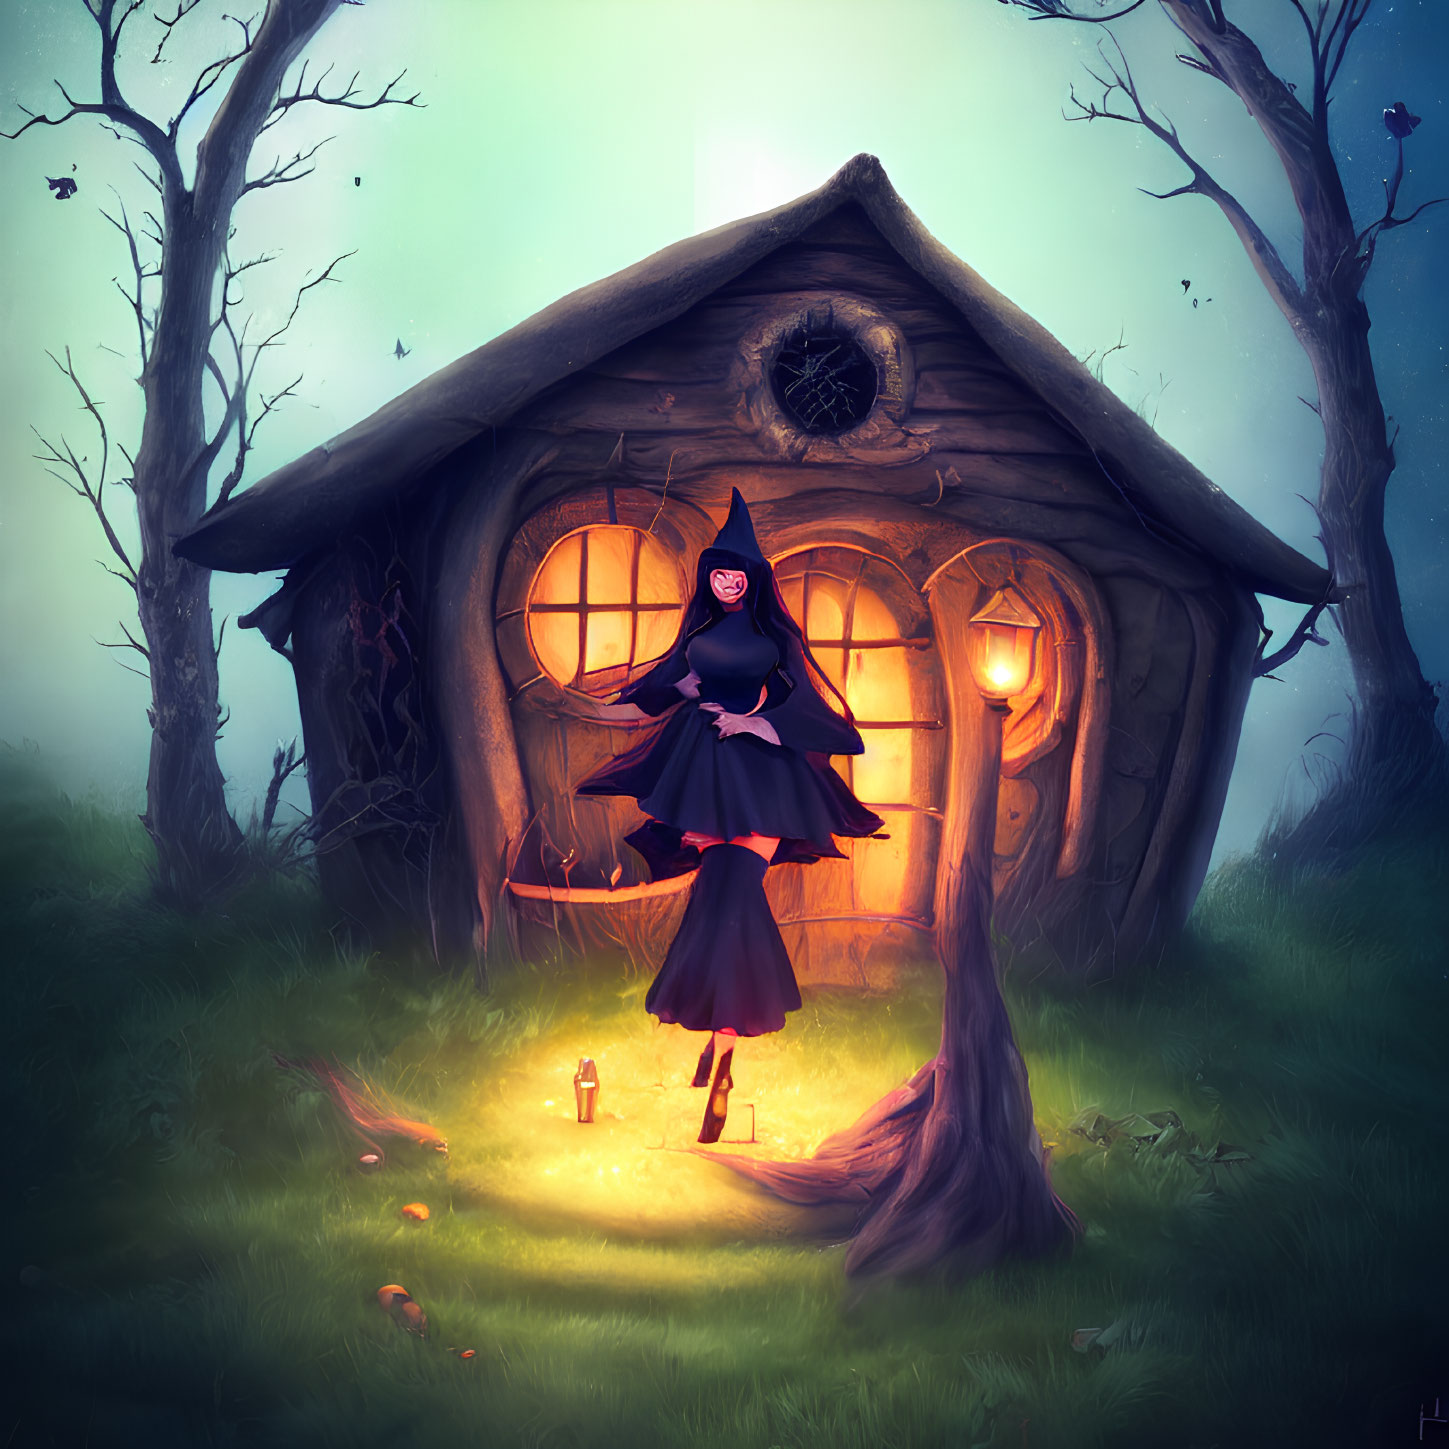 Whimsical witch illustration at dusk with cozy treehouse